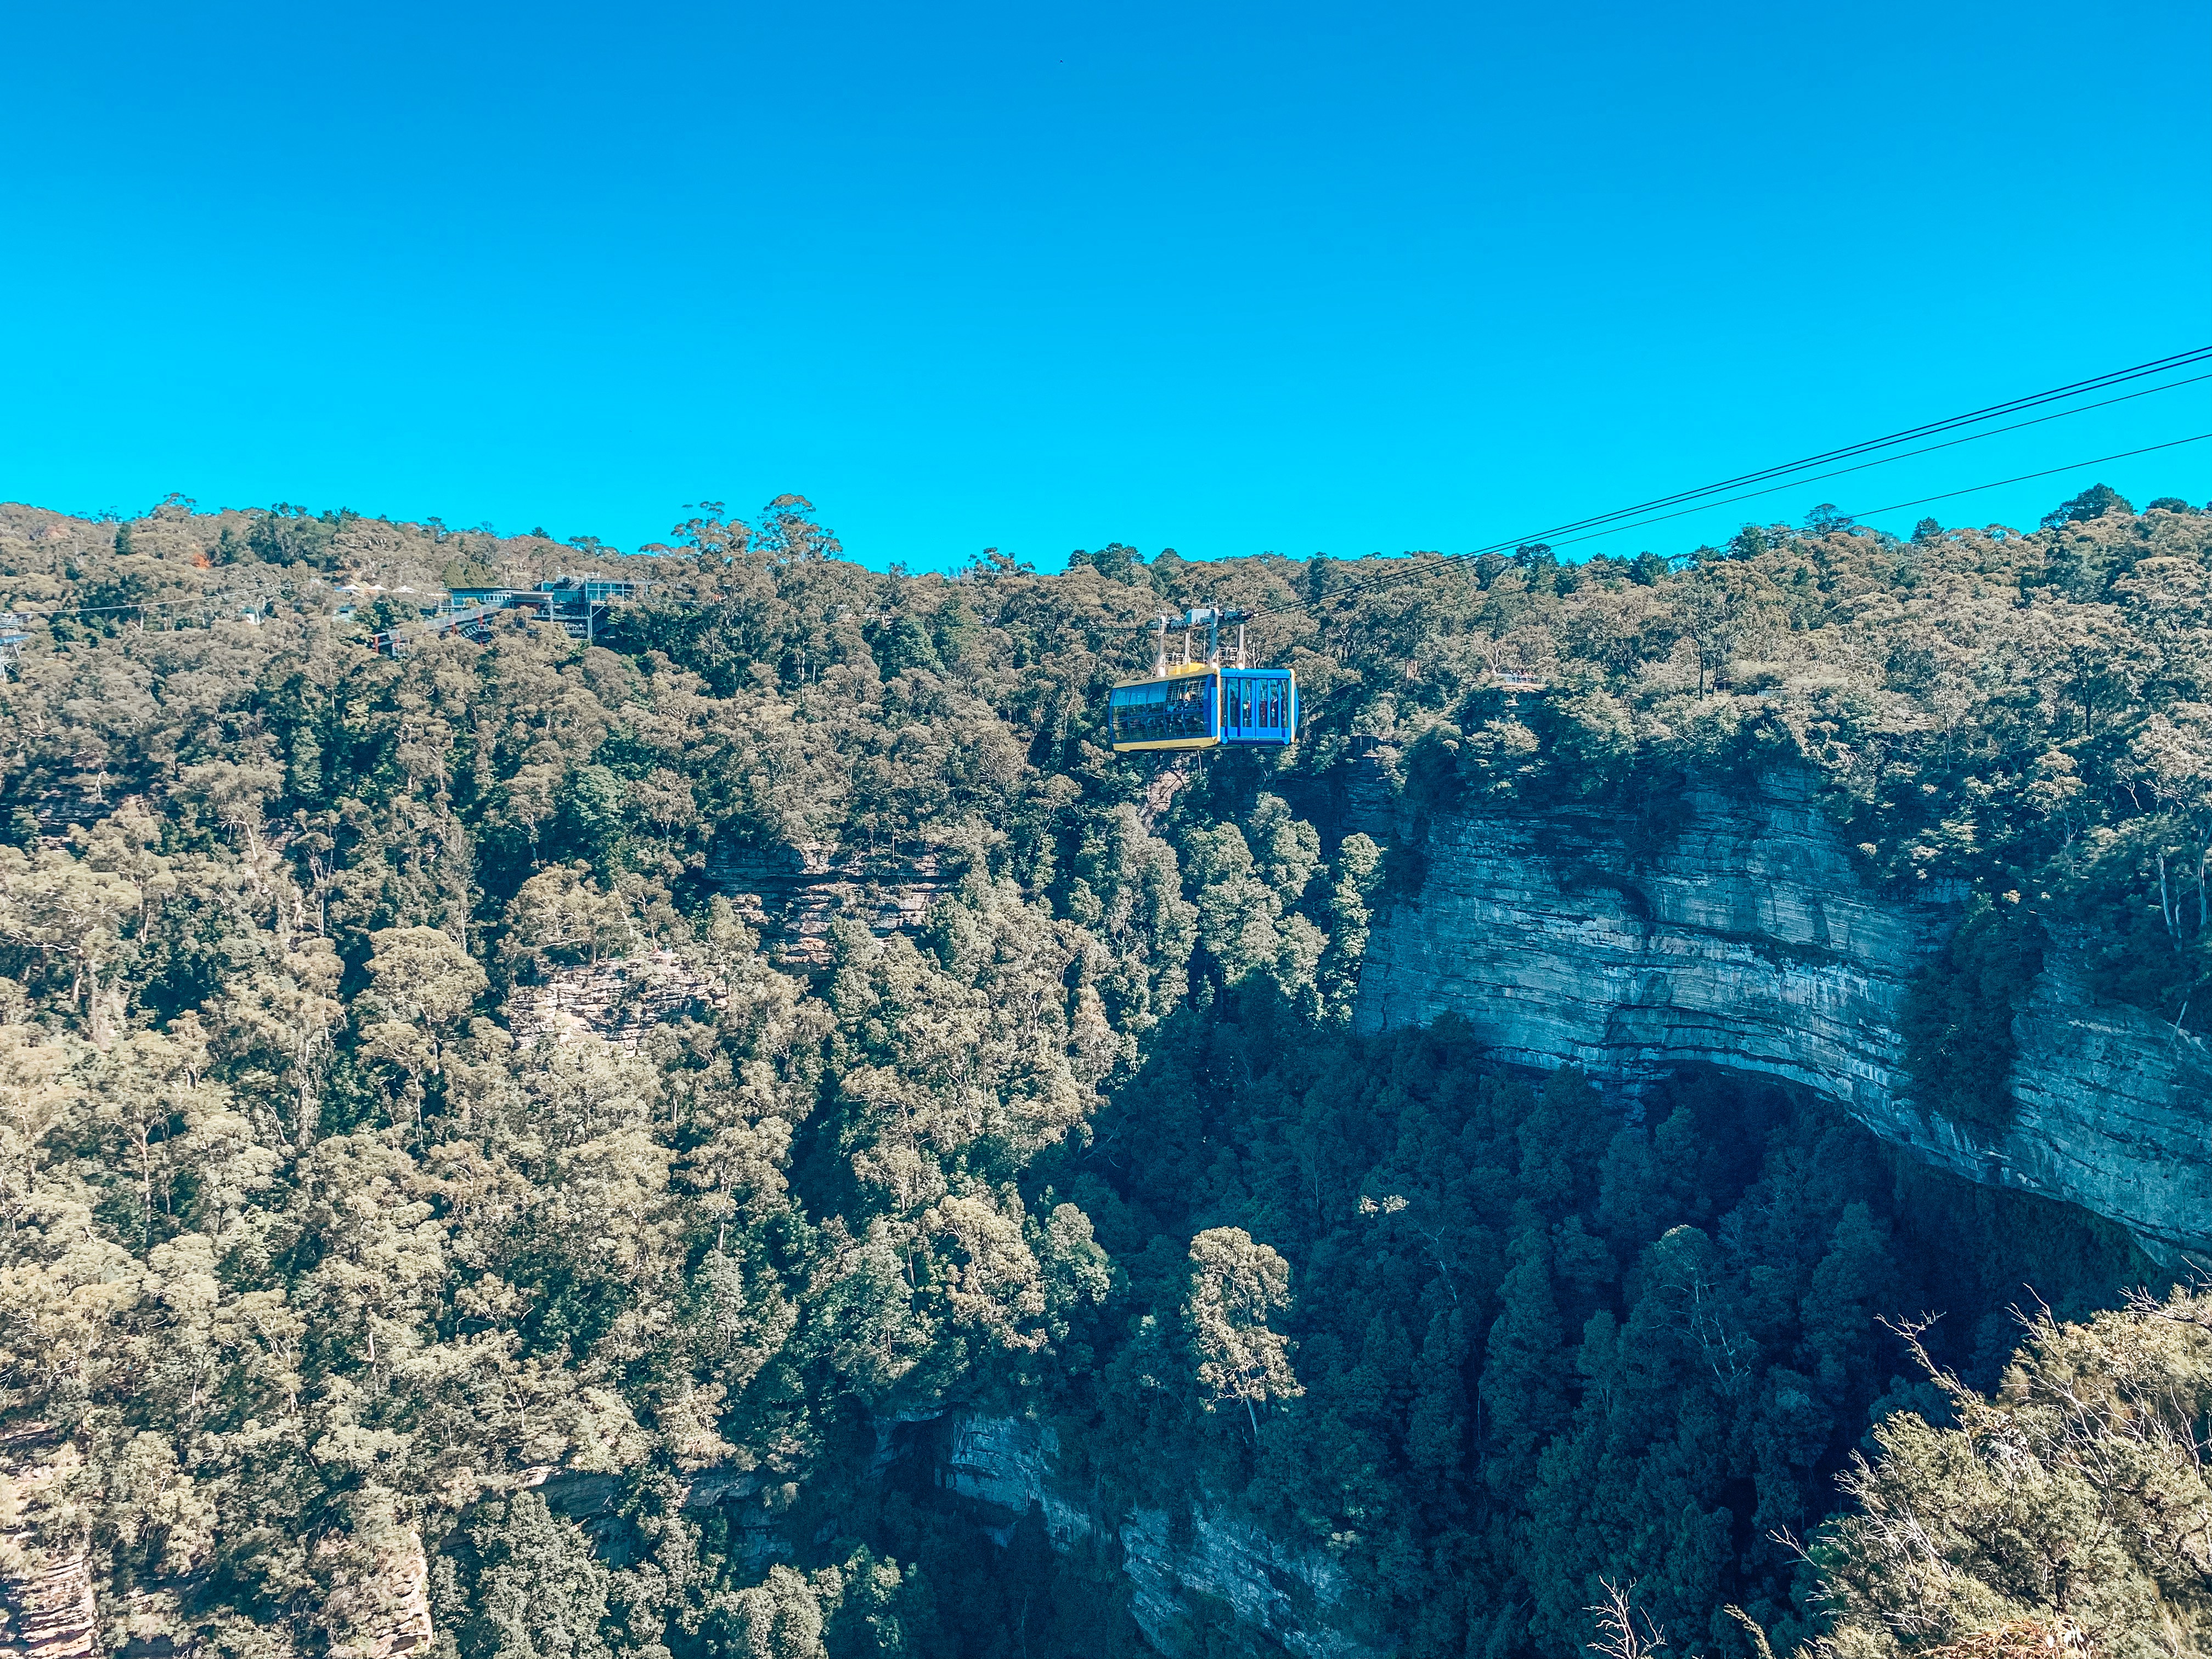 Image from Scenic Skyway ride in 'Scenic World' Blue Mountains